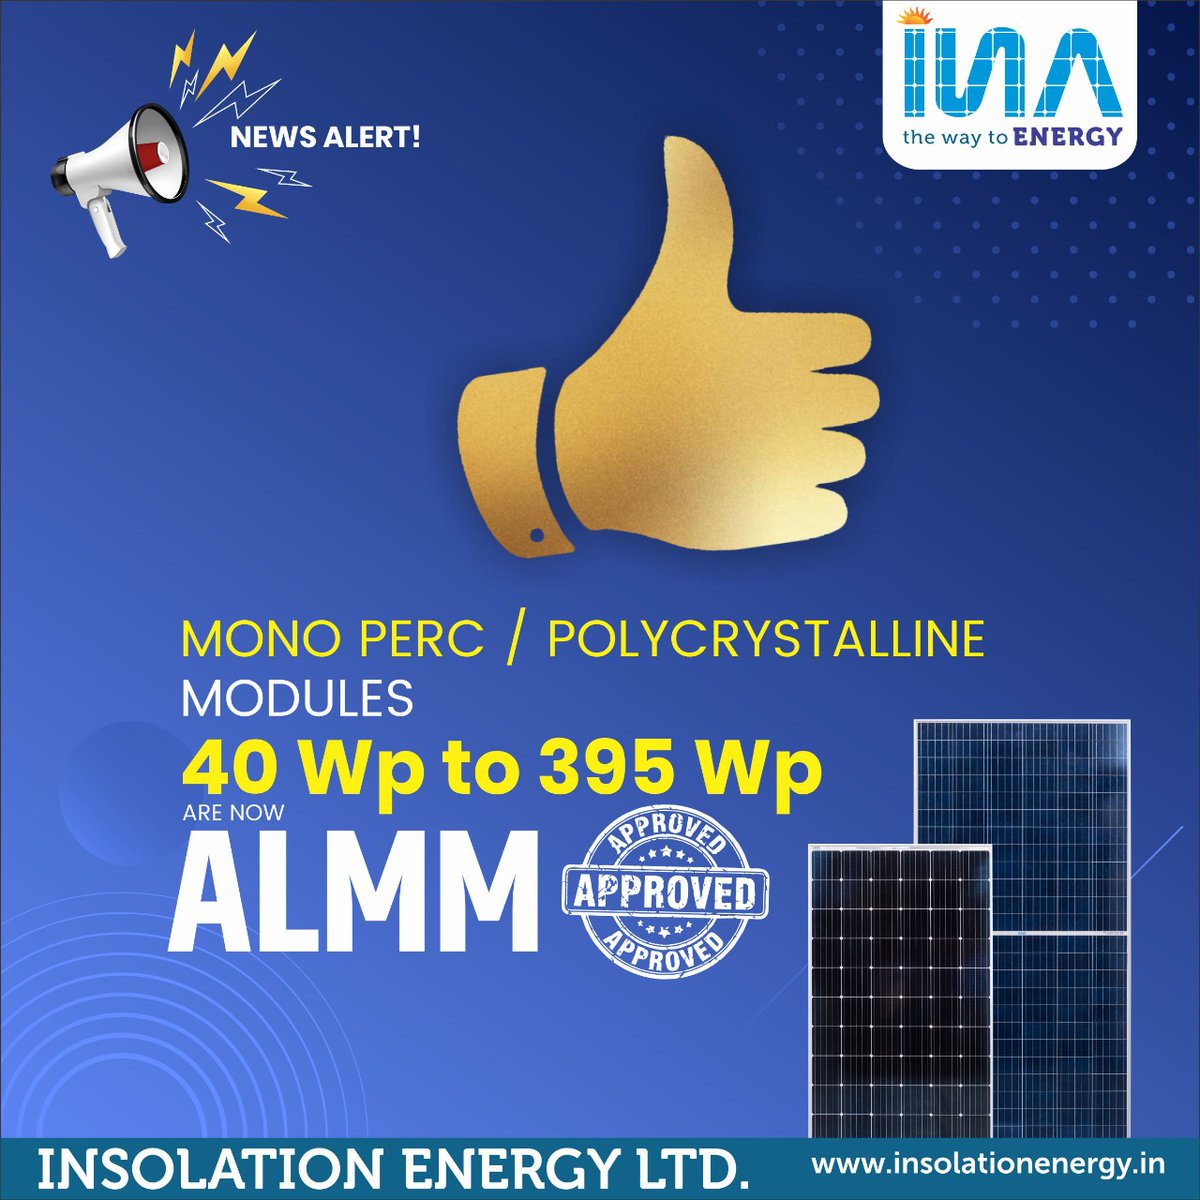 Sharing the good news as we head towards launching our IPO, INA Solar MonoPERC / Polycrystalline Modules ranging from 40 to 395 WP are now ALMM Approved. 

Click here to visit ALMM Approval List - mnre.gov.in

#INASolar #NewsAlert #ALMMApproved #MonoPERC